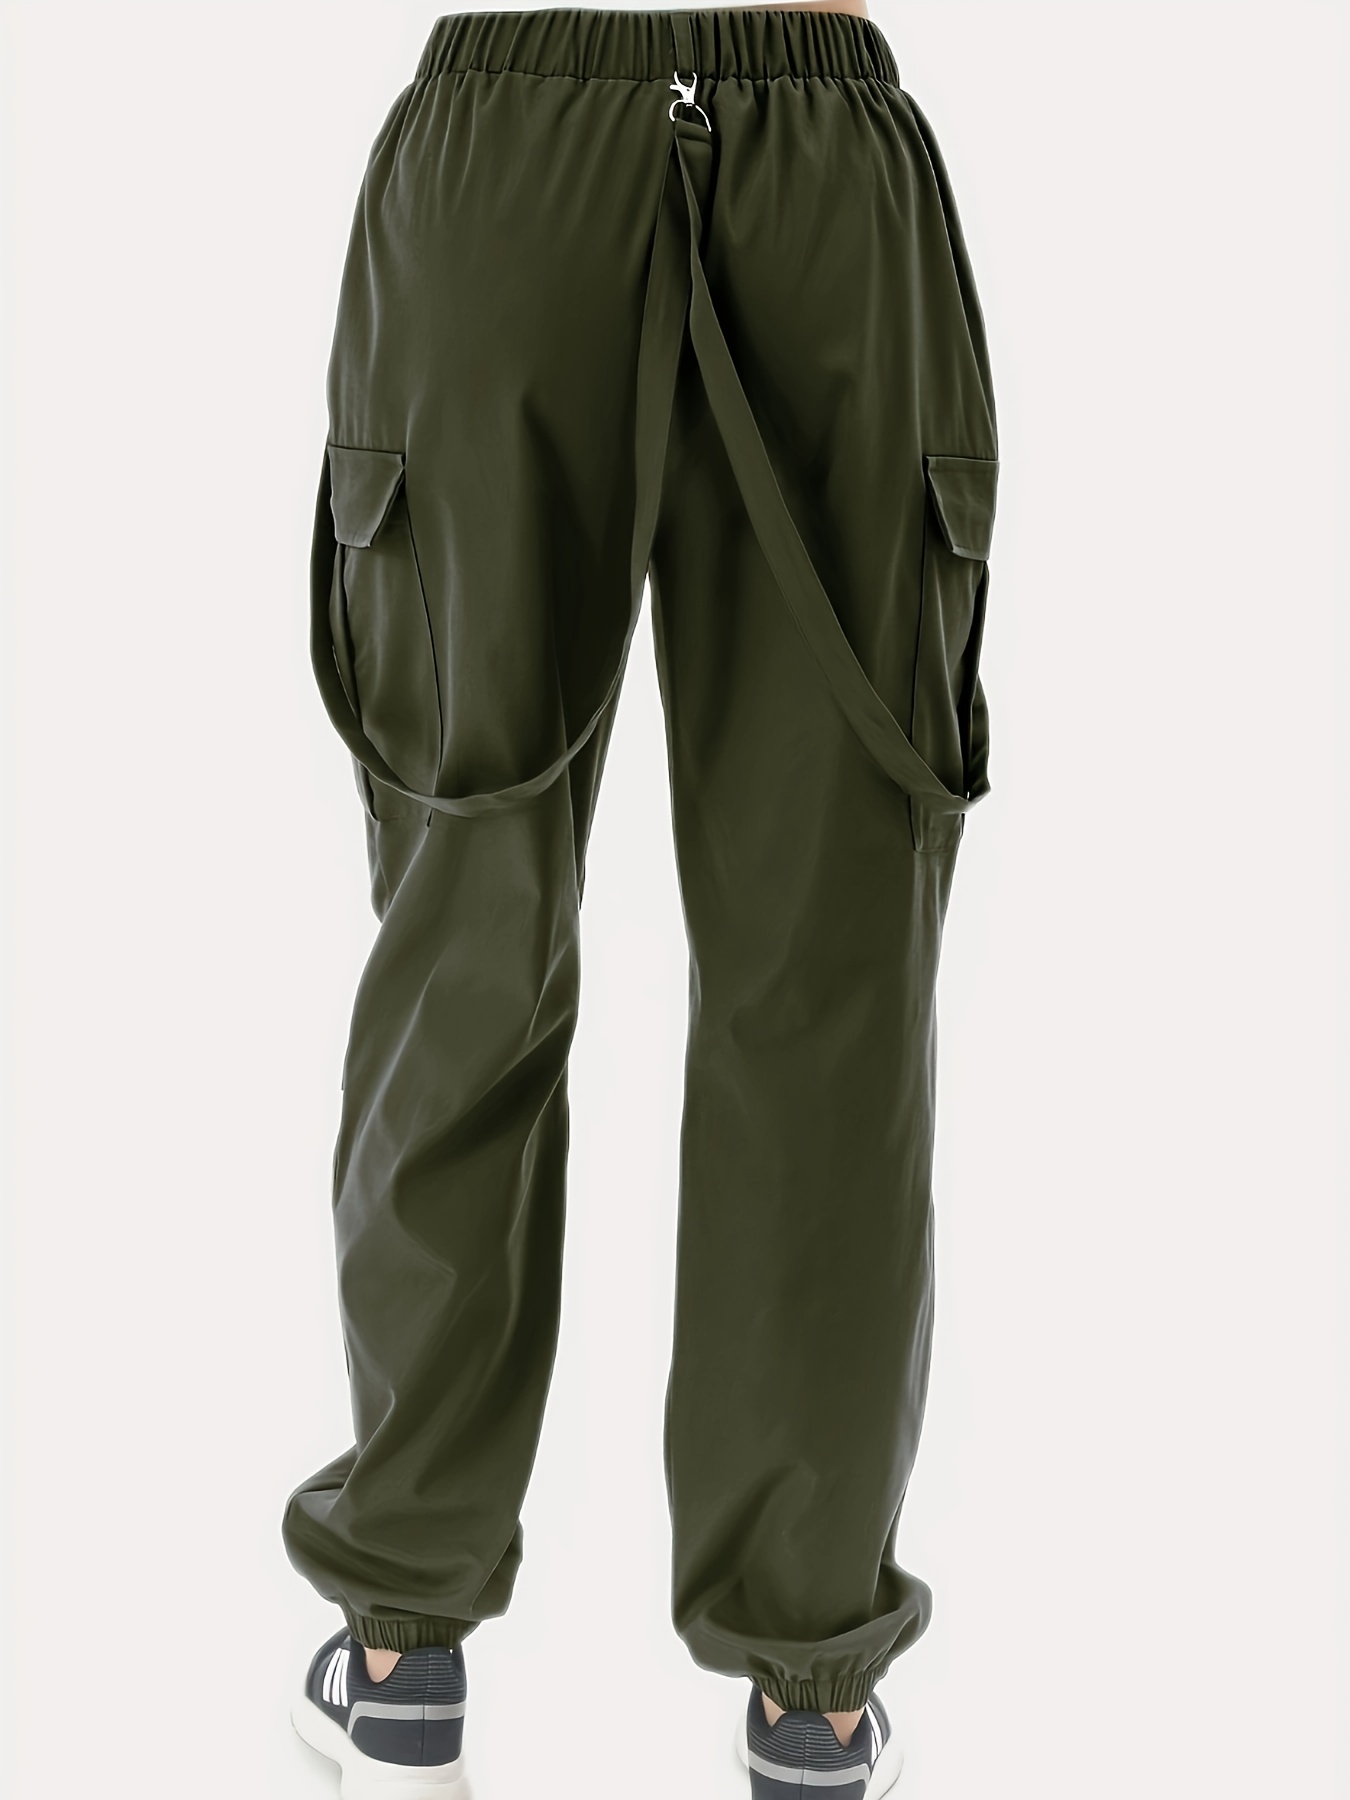 Cargo Pants With Strap, Casual Every Day Pants, Women's Clothing